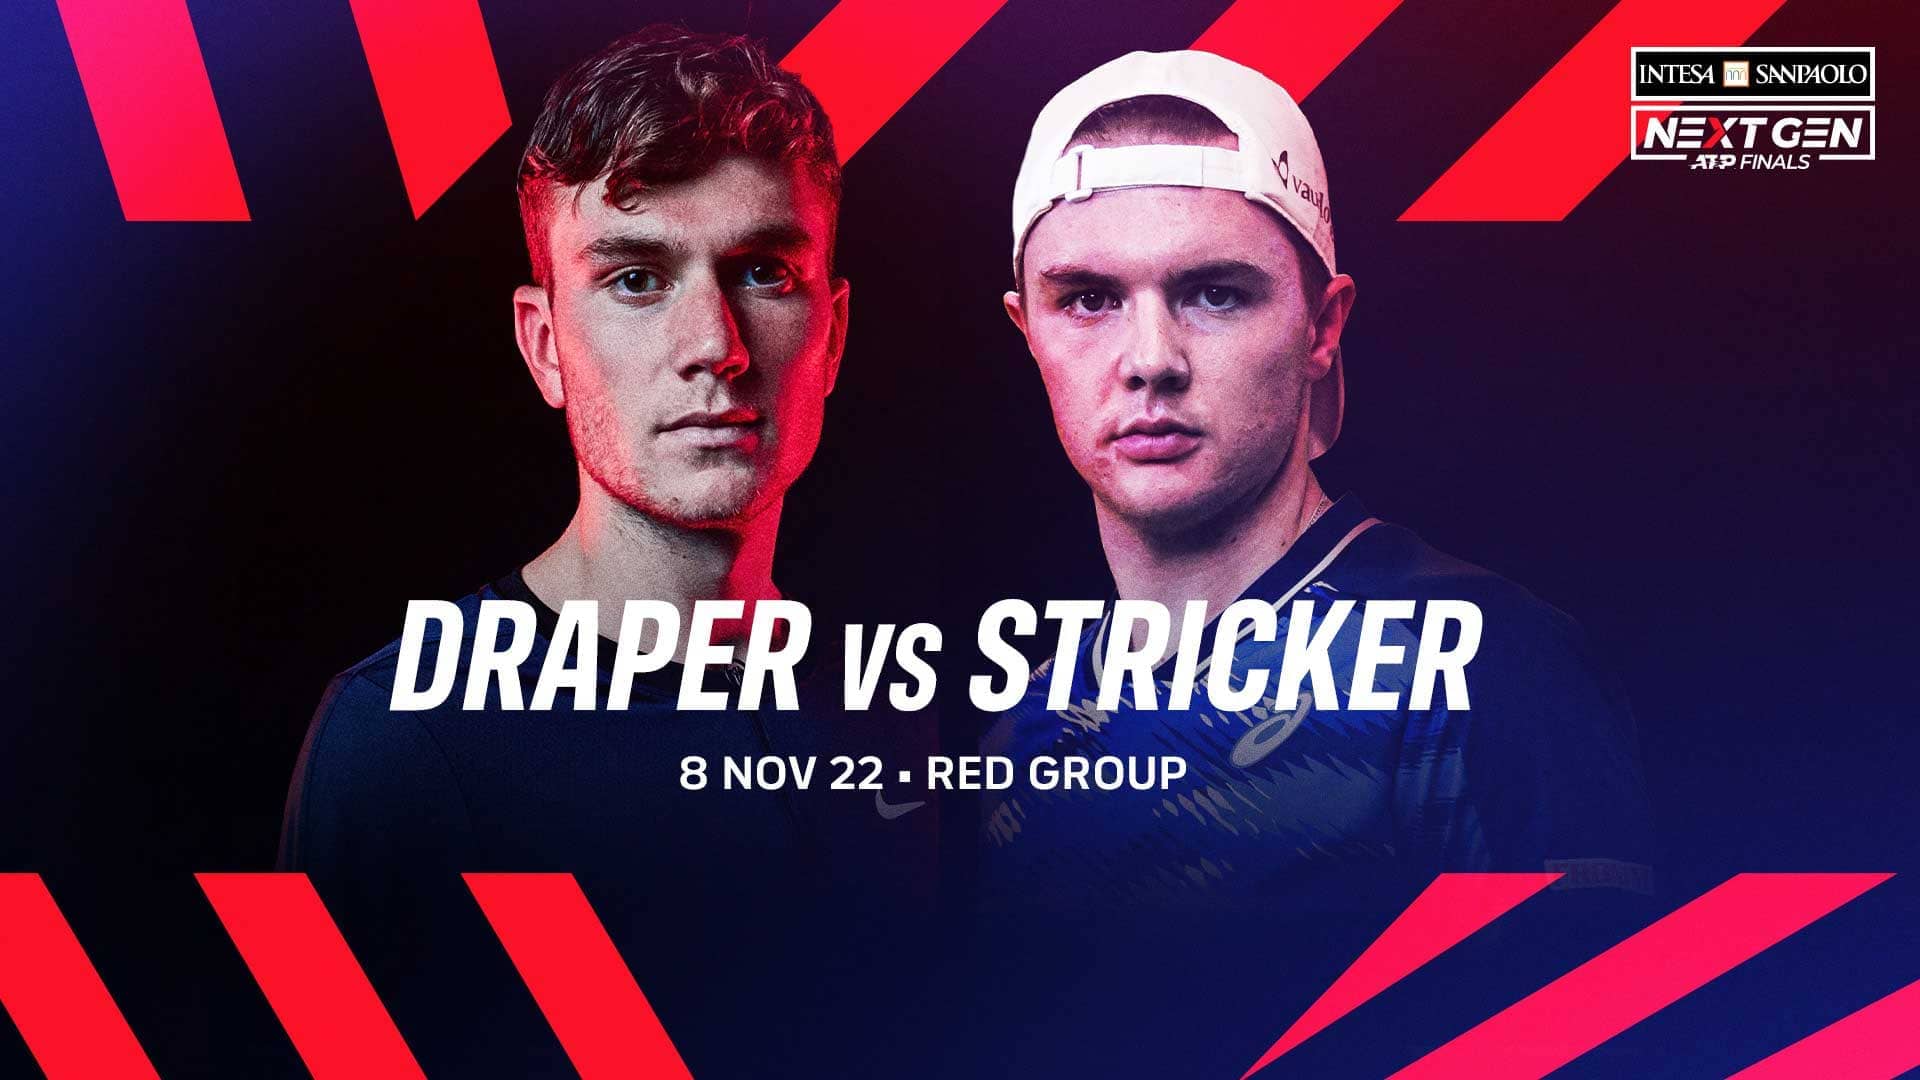 Jack Draper and Dominic Stricker will meet on Tuesday in Milan.